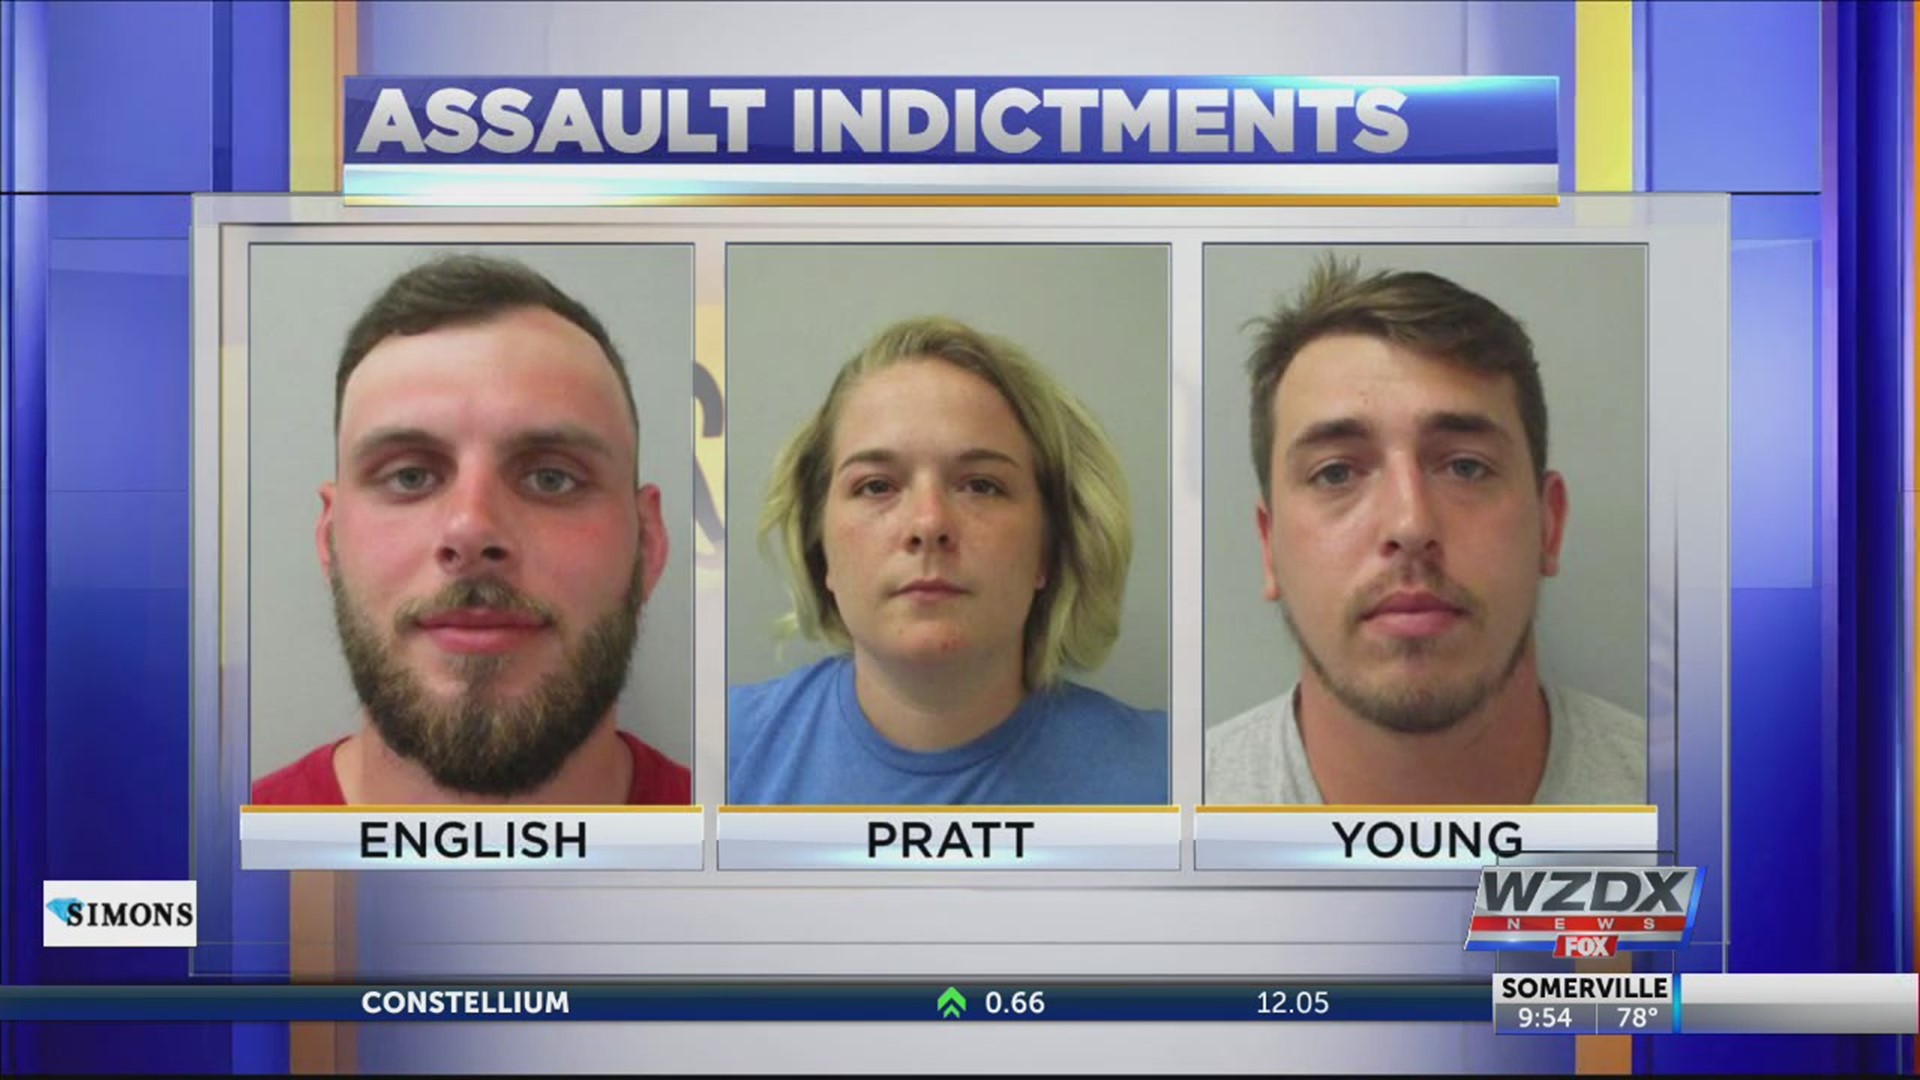 A grand jury indicted three suspects on misdemeanor charges in an assault that happened earlier this summer during a kayaking trip on the Flint River.